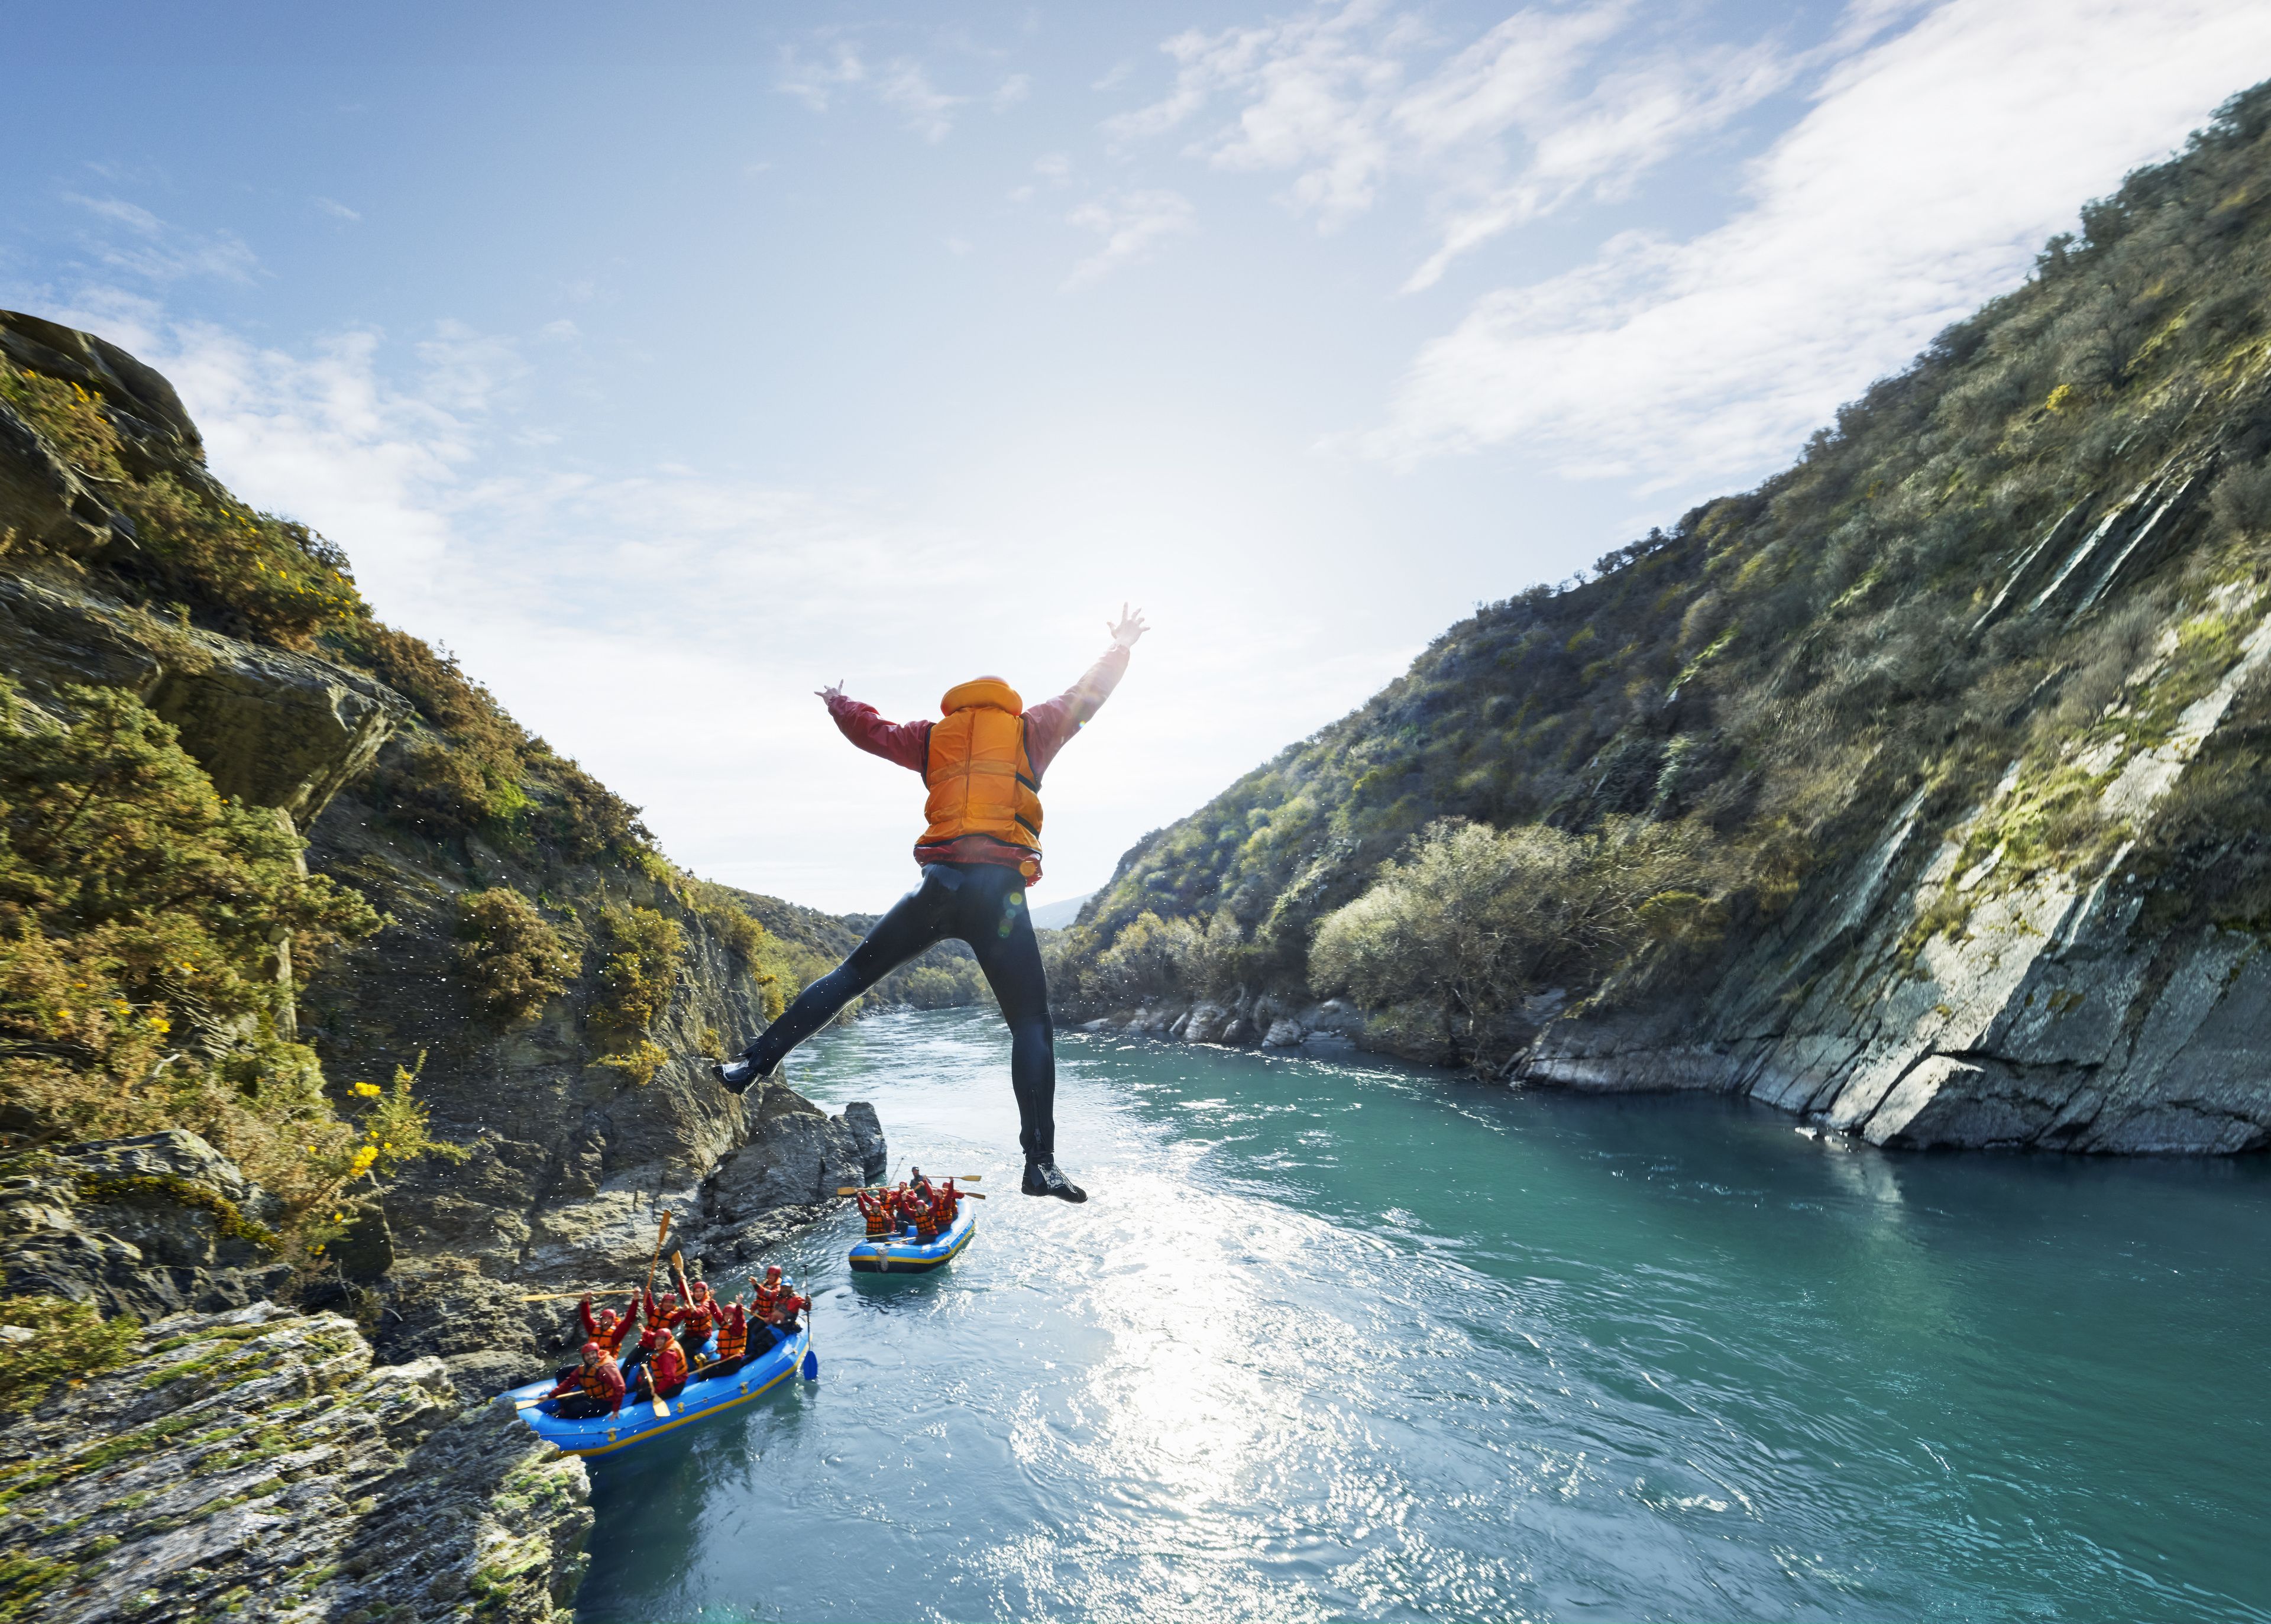 95 Attractions & Fun Things to Do in Queenstown from NZ$25 | Expedia.co.nz